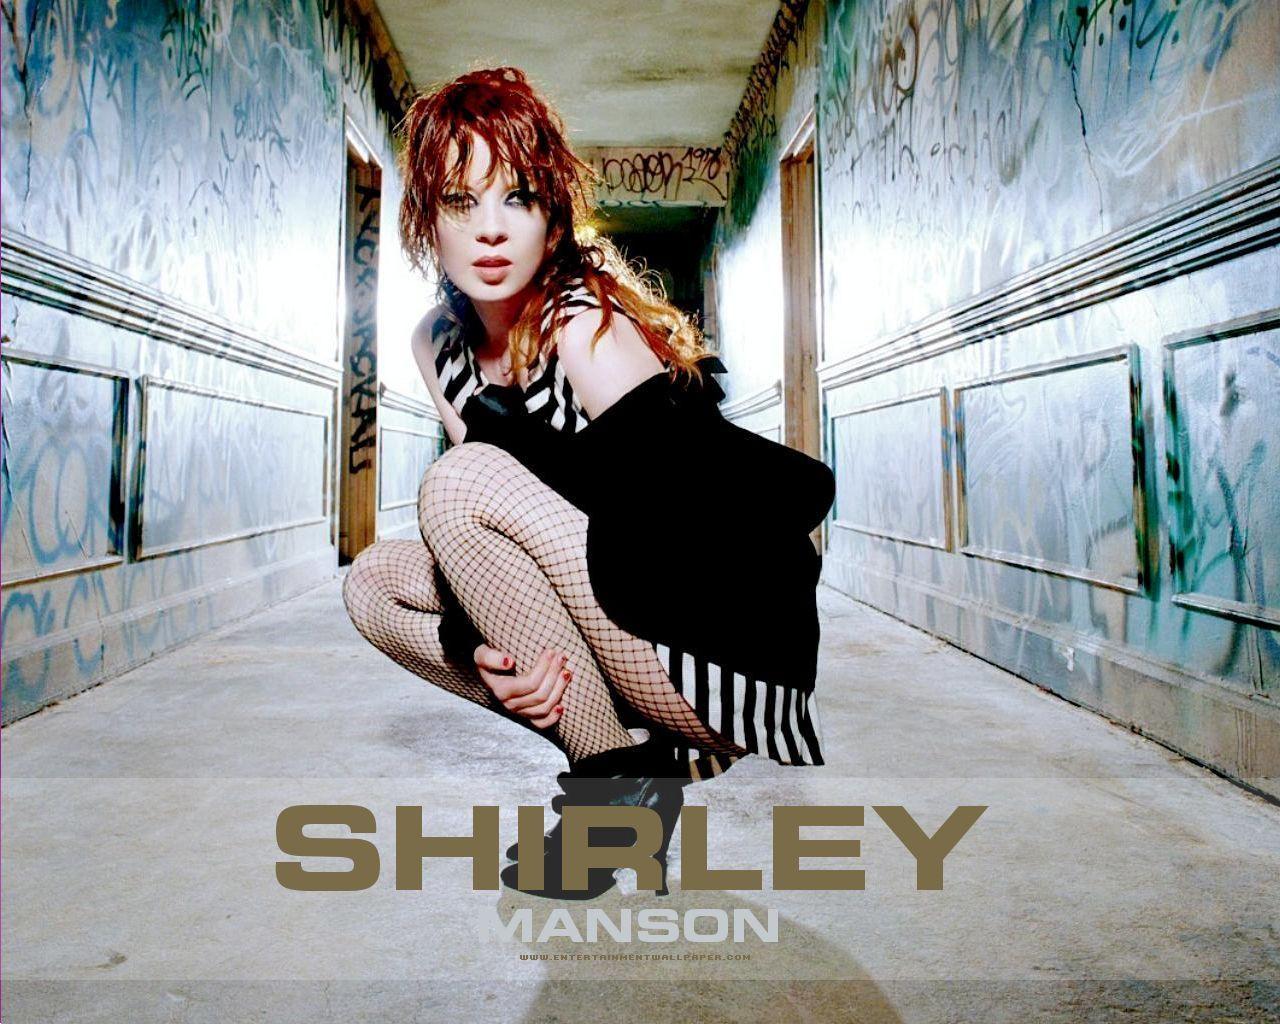 Garbage image Shirley Manson HD wallpaper and background photo